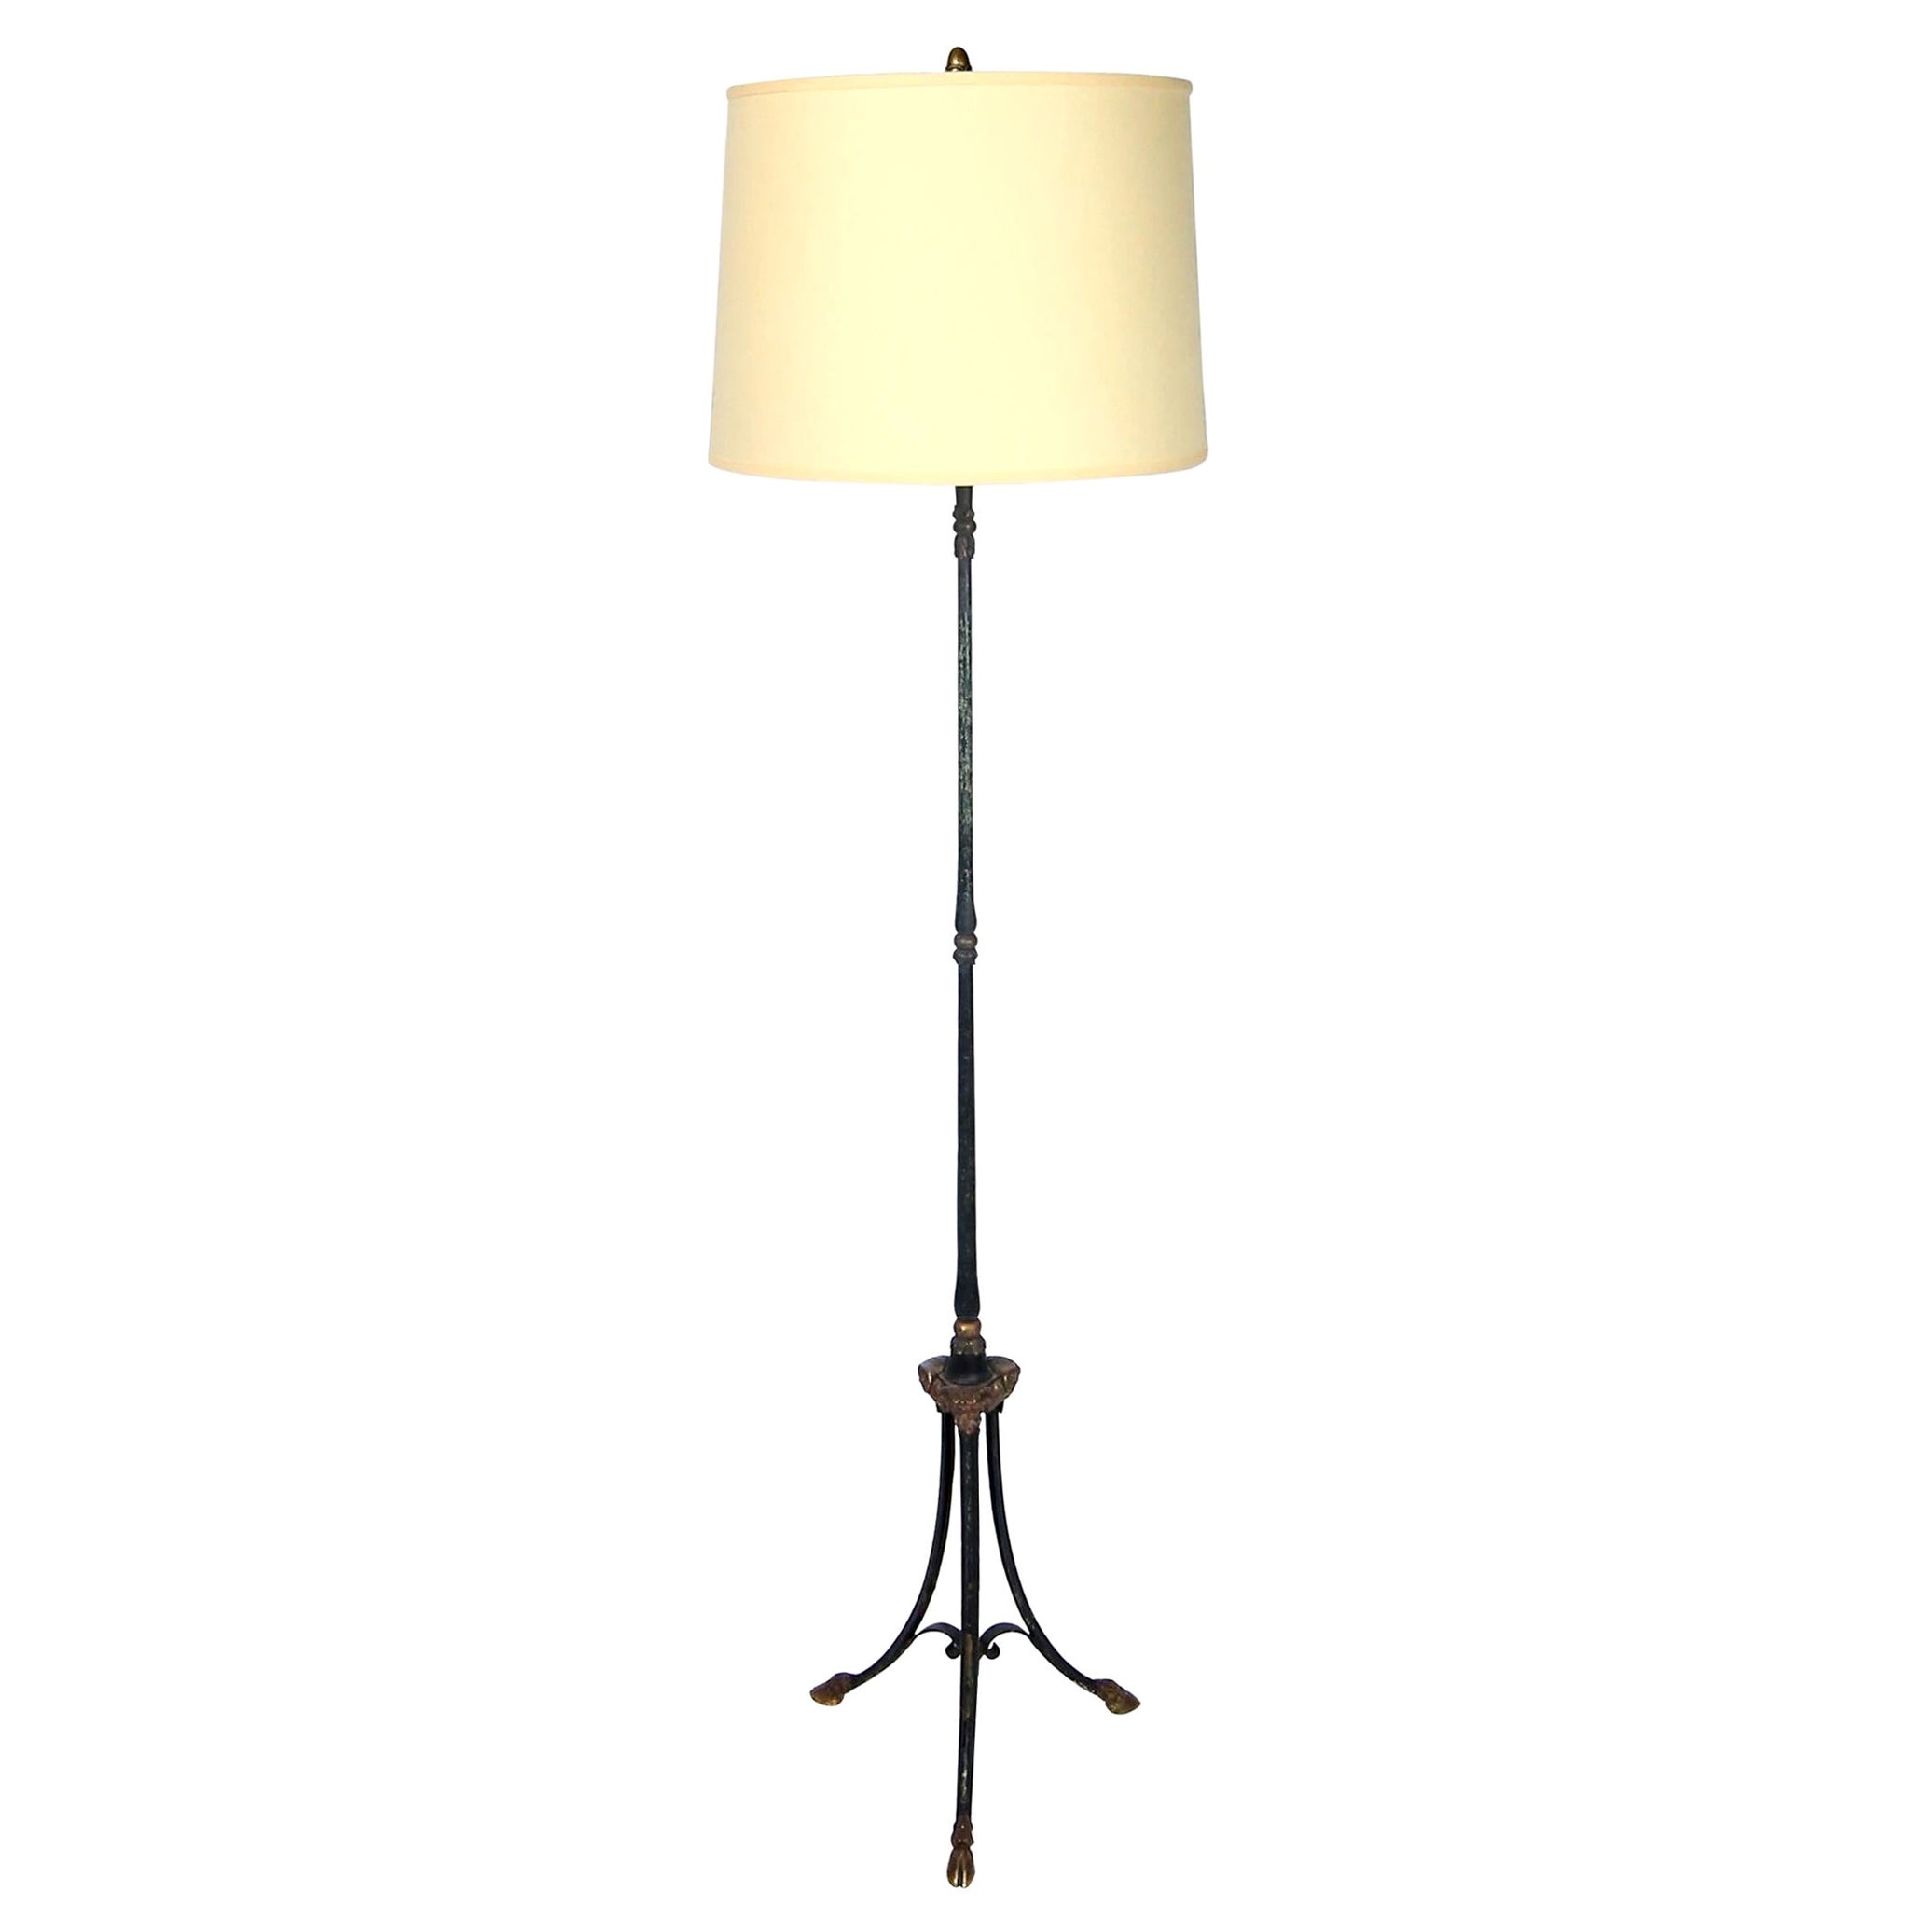 Hollywood Regency Wrought Iron and Brass Floor Lamp